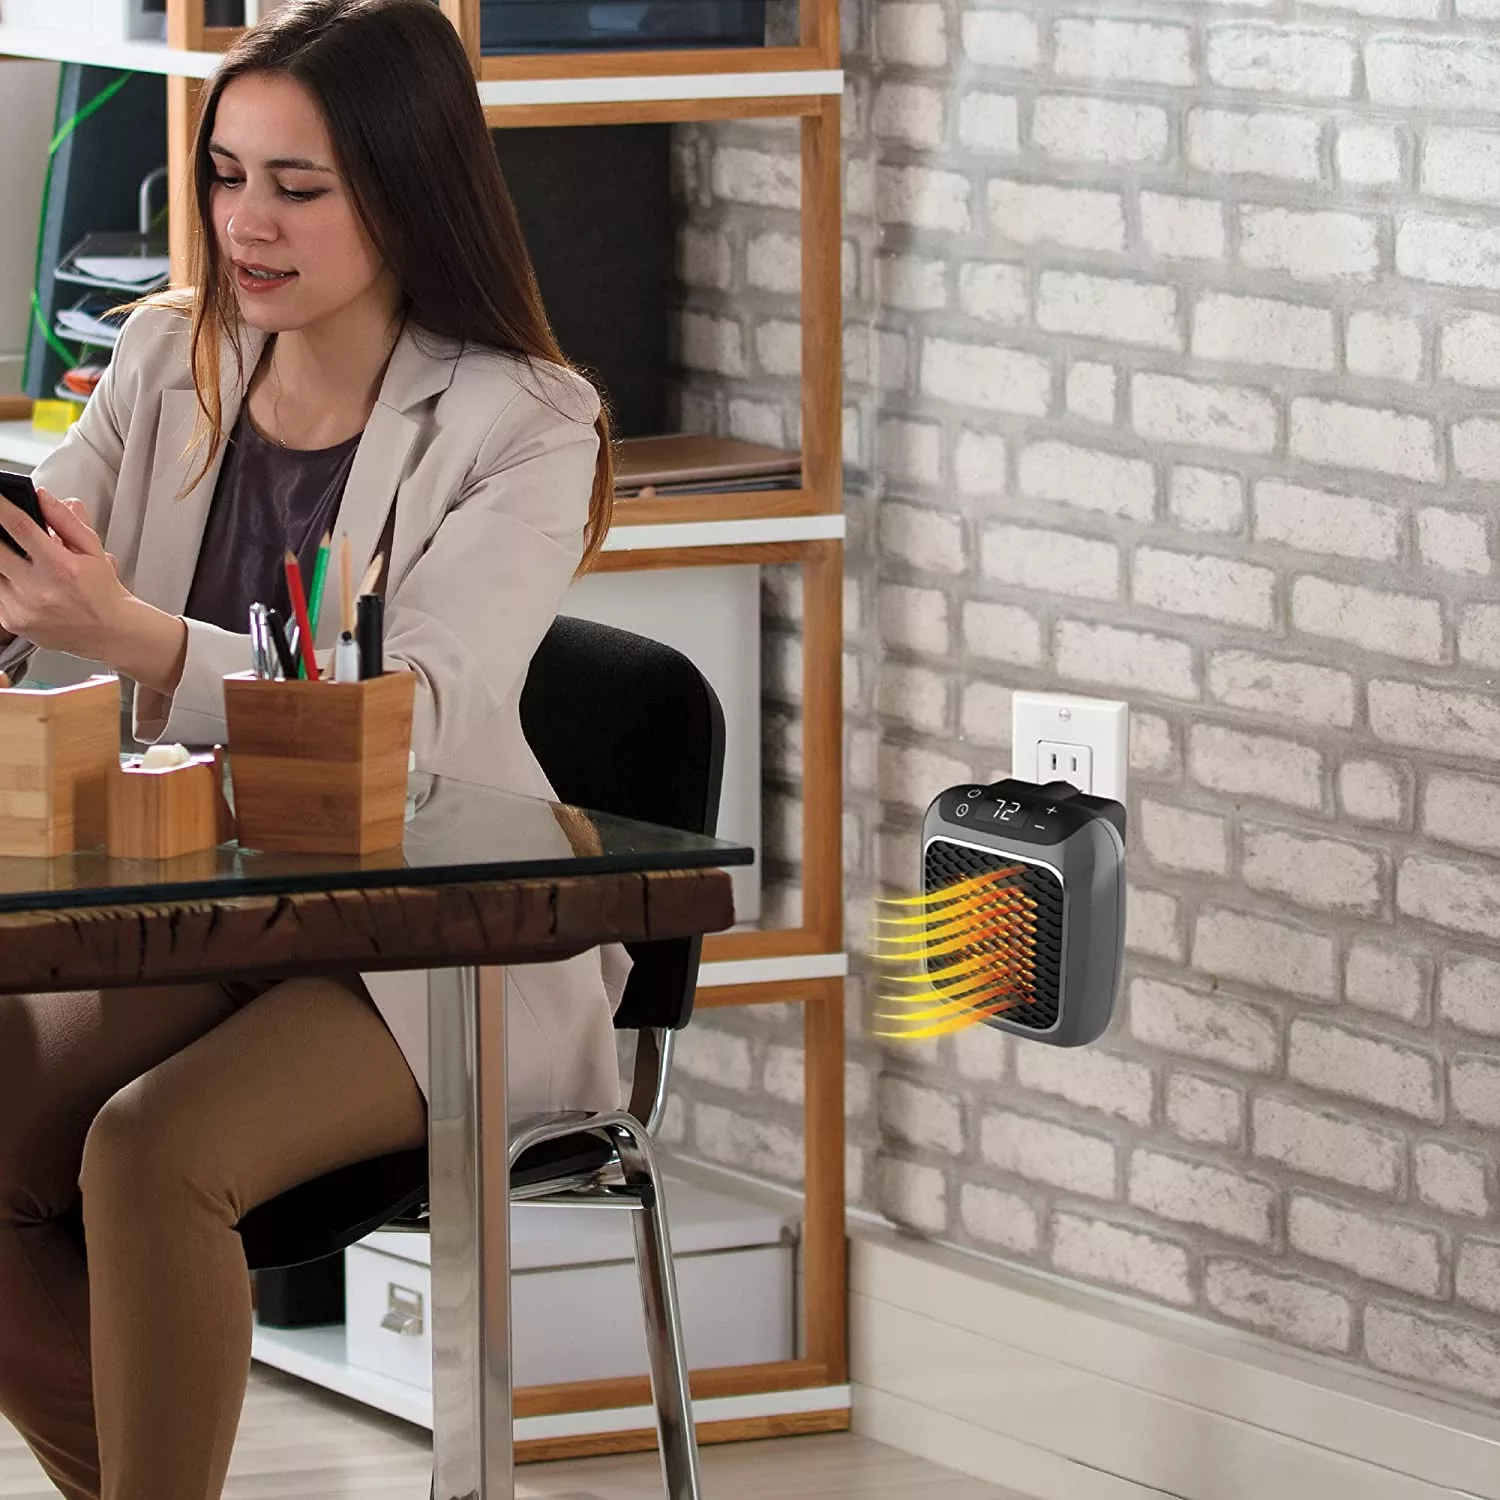 Woman sitting at desk with Ontel Handy Heater behind her